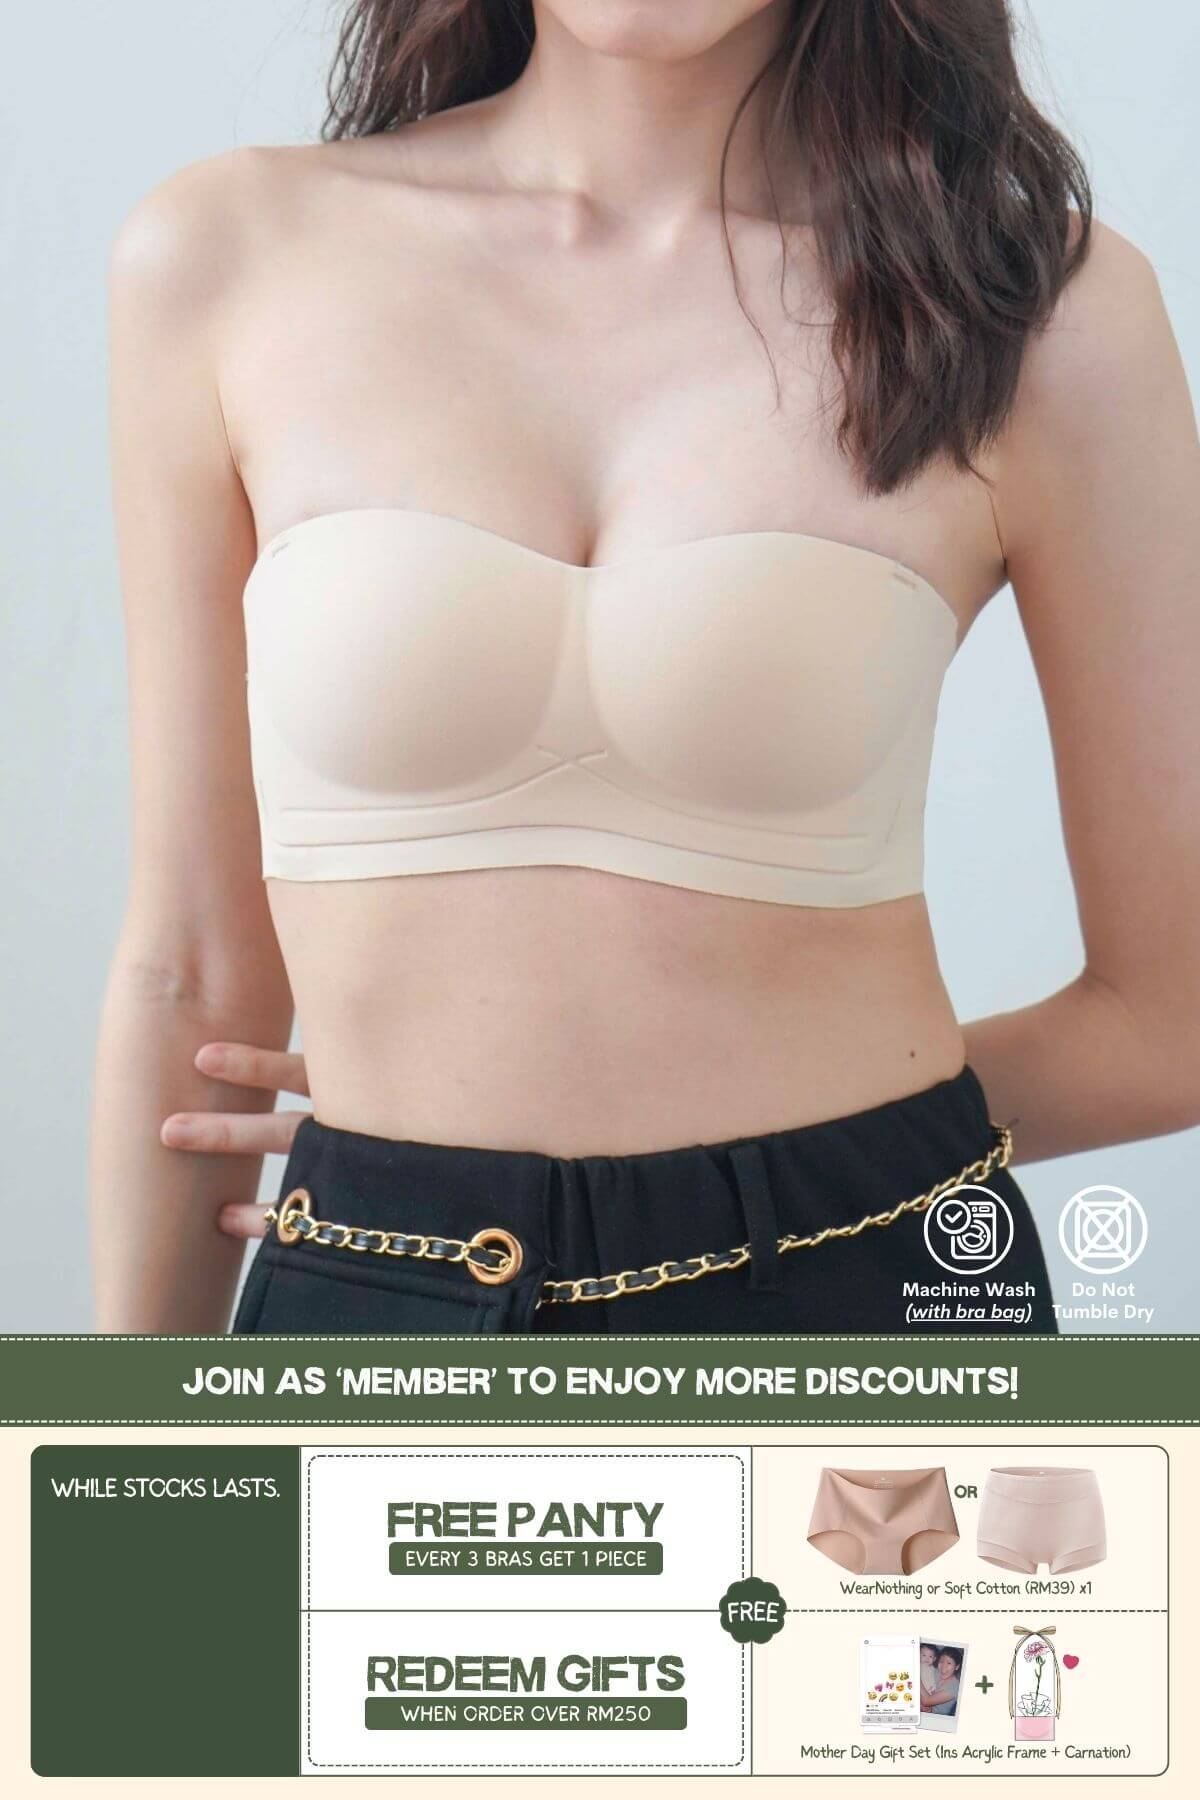 [New-In] Daily Softie Multi-way Seamless Bra In Soft Skin - Adelais Official - Bra - Strapless (Multi-Way) & Push Up